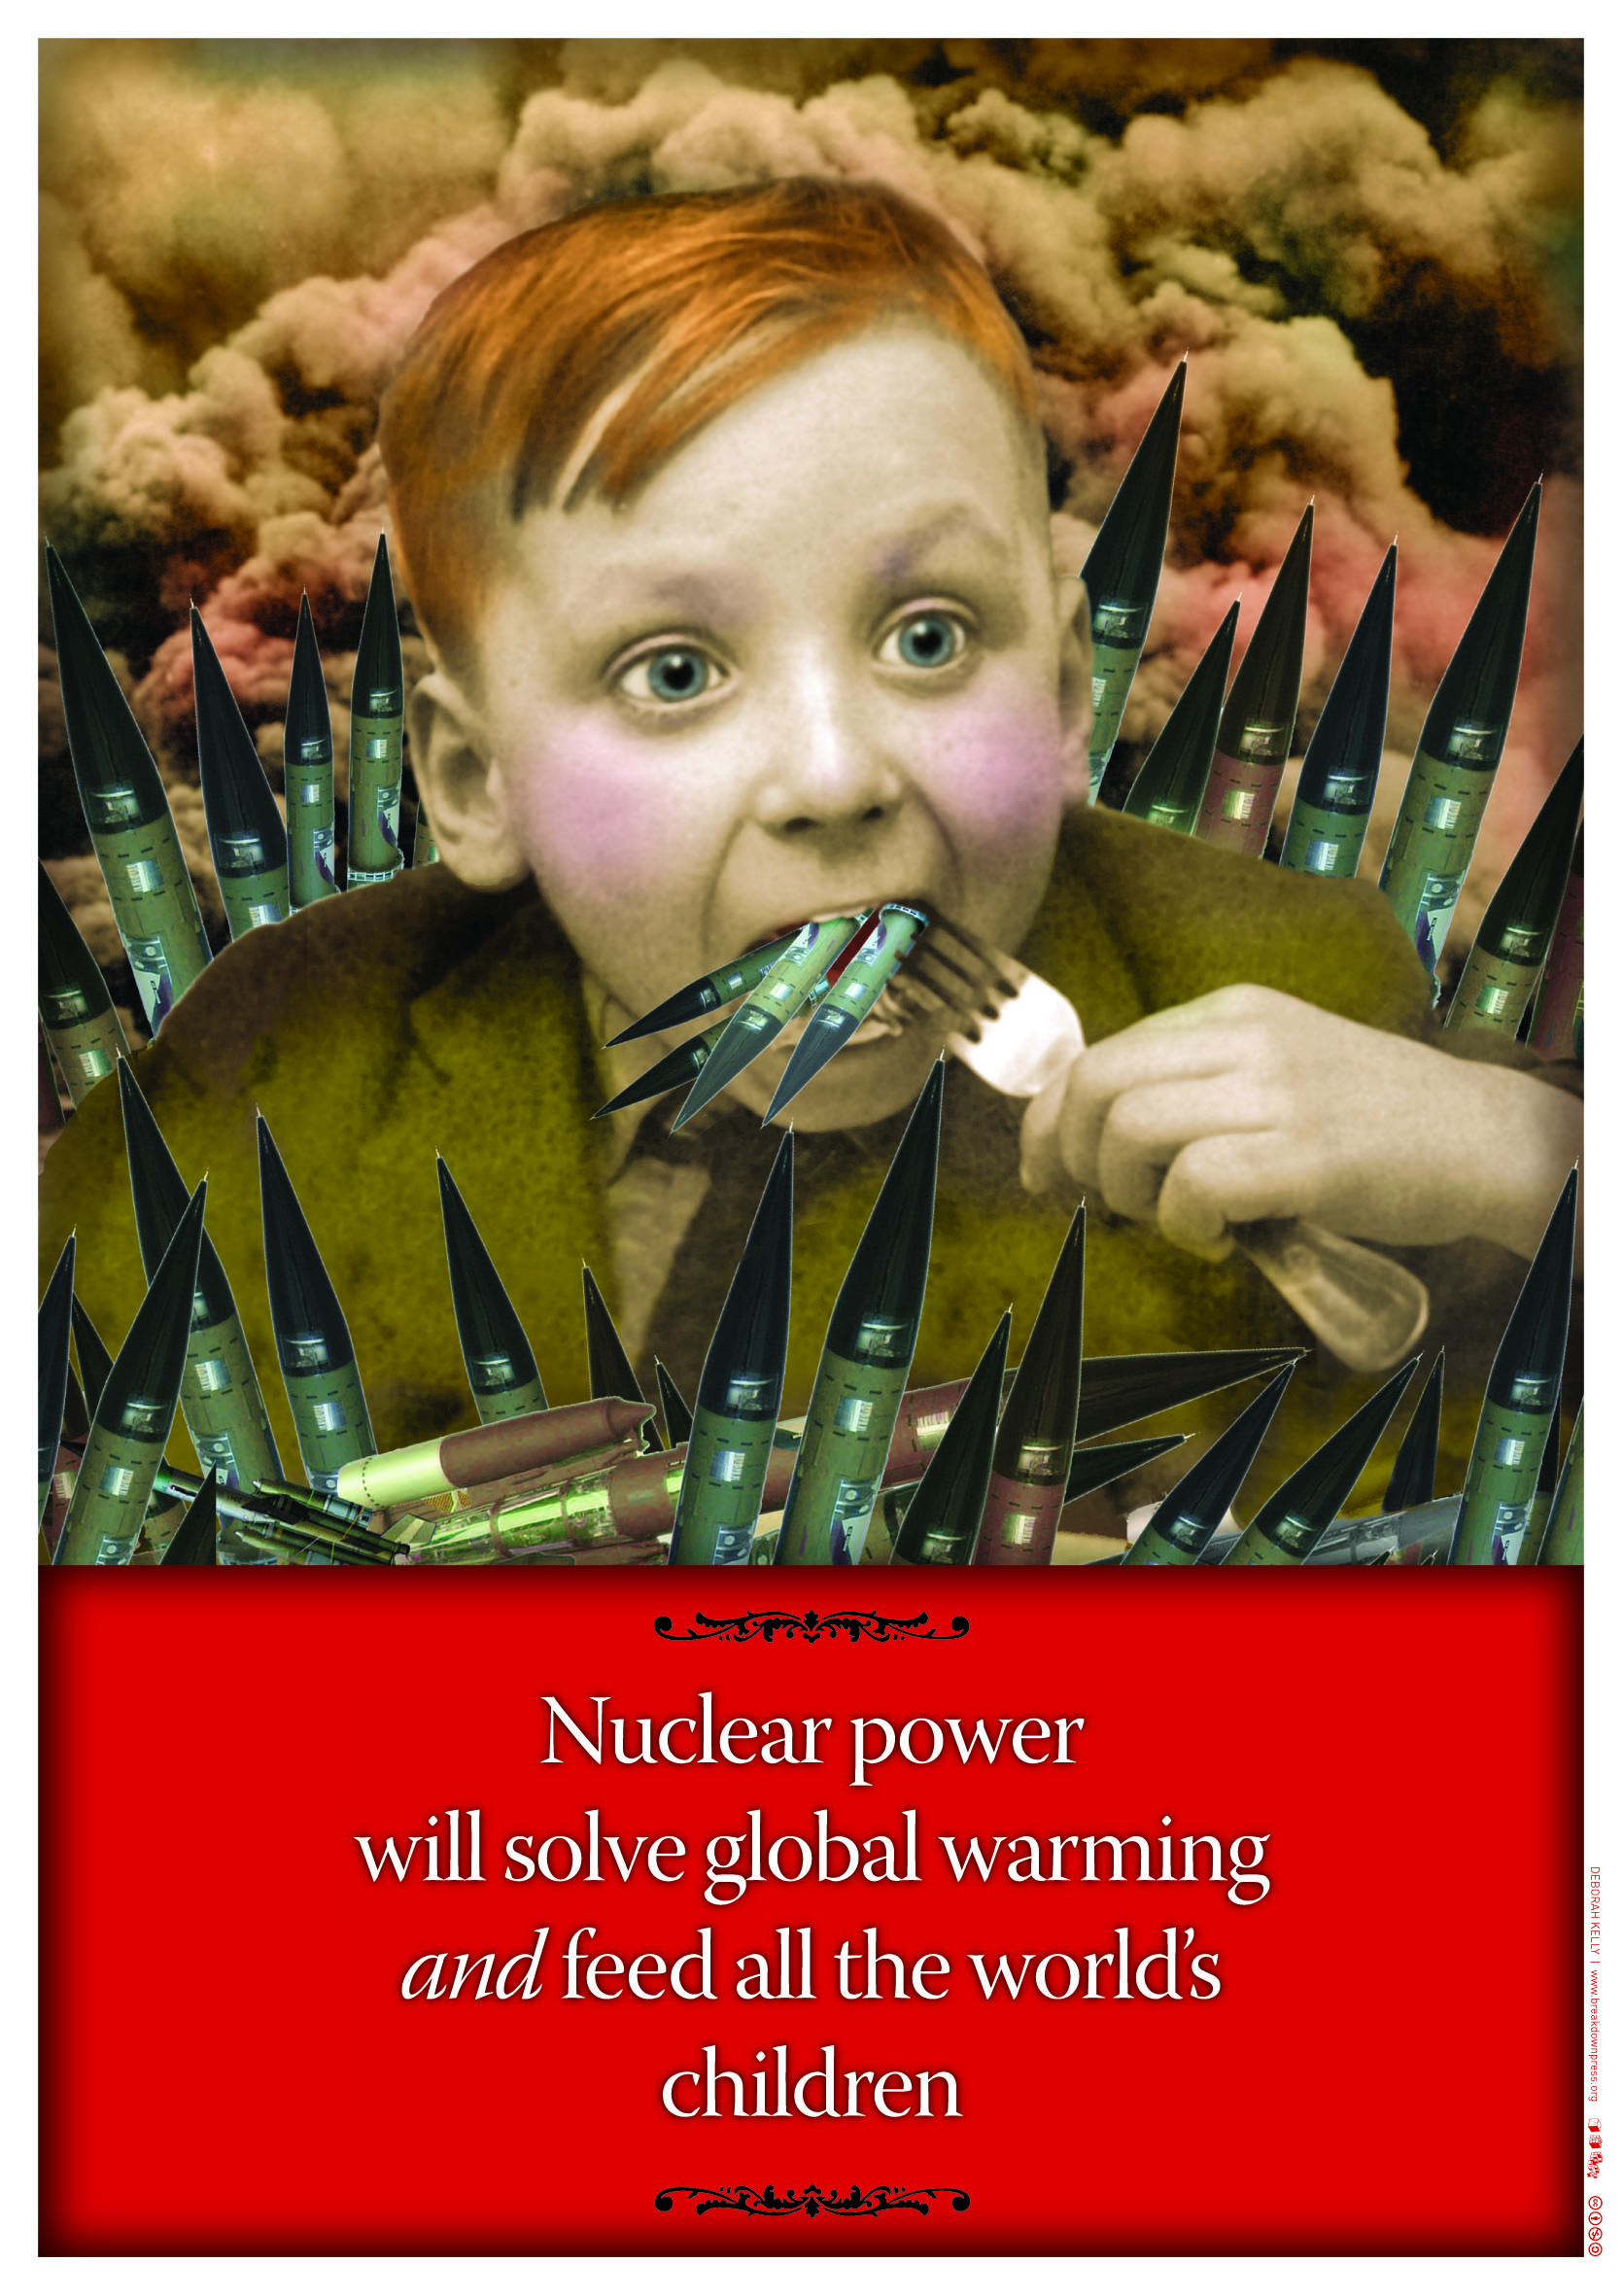 Image of a child eating nuclear warheads reads "nuclear power will solve global warming and feed all the world's children" 